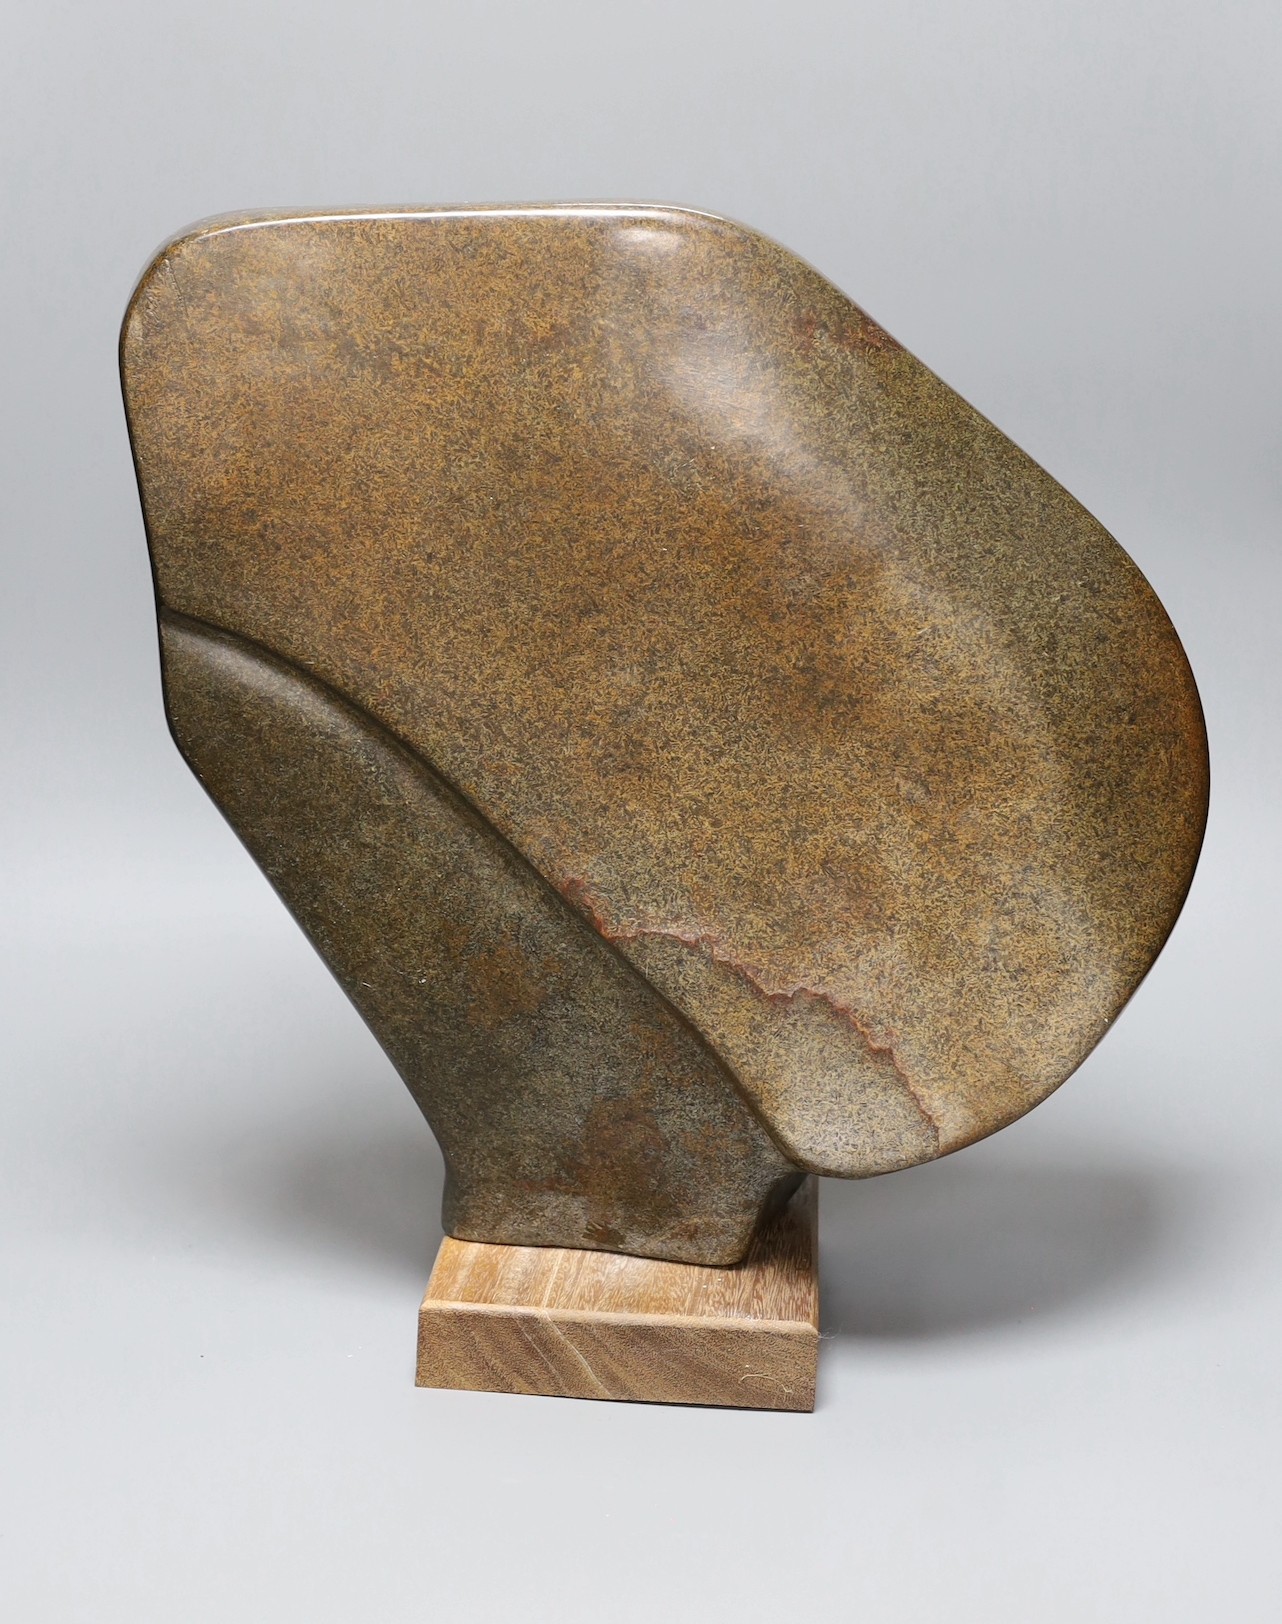 A Zimbabwean carved and polished stone abstract study of a head with a fist, 35cms.